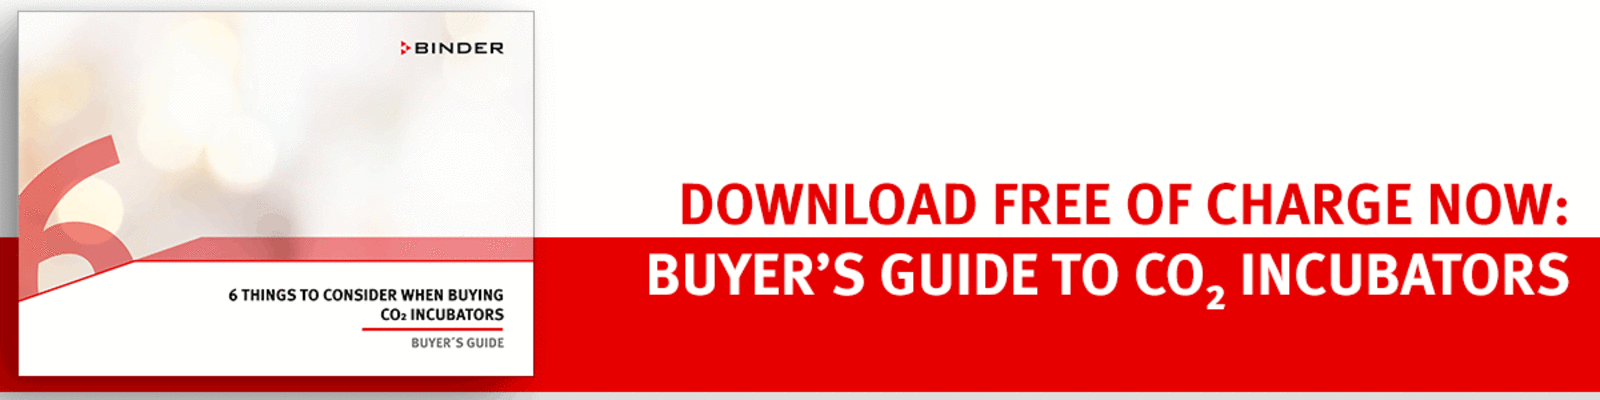 Download free of charge - Buyer's Guide to co2 incubators